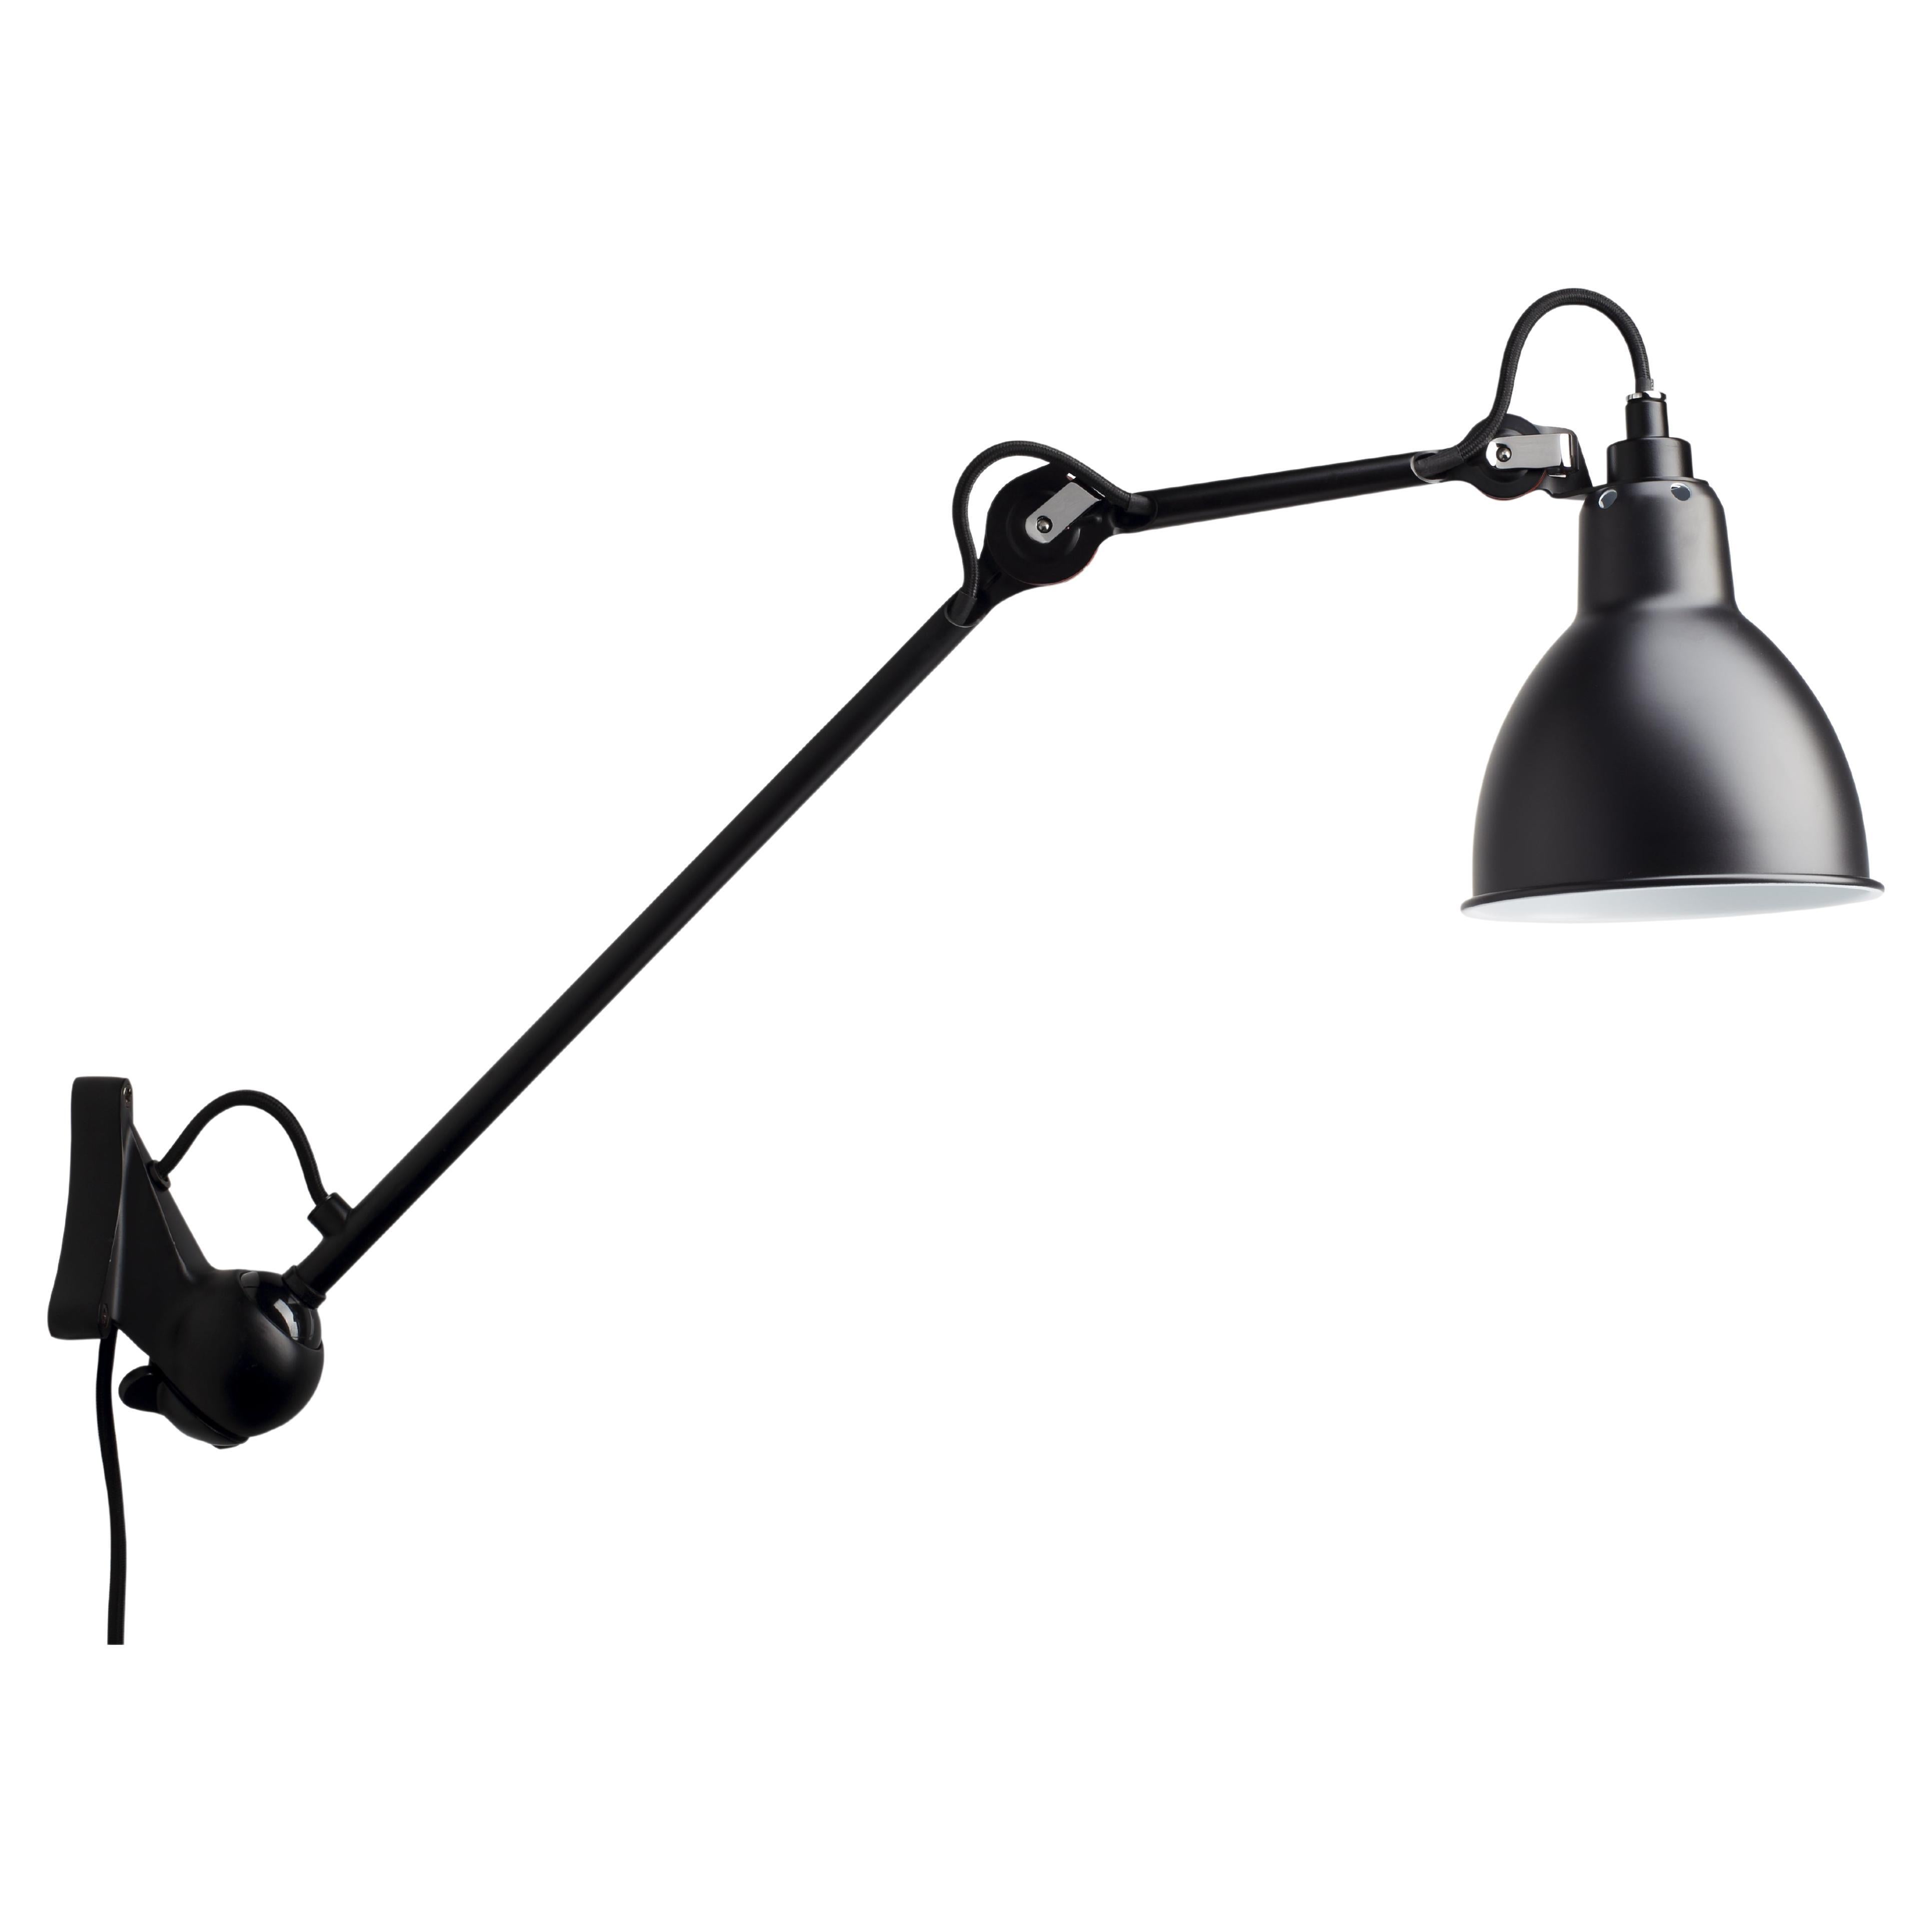 DCW Editions La Lampe Gras N°222 Wall Lamp in Black Arm and Black Shade For Sale